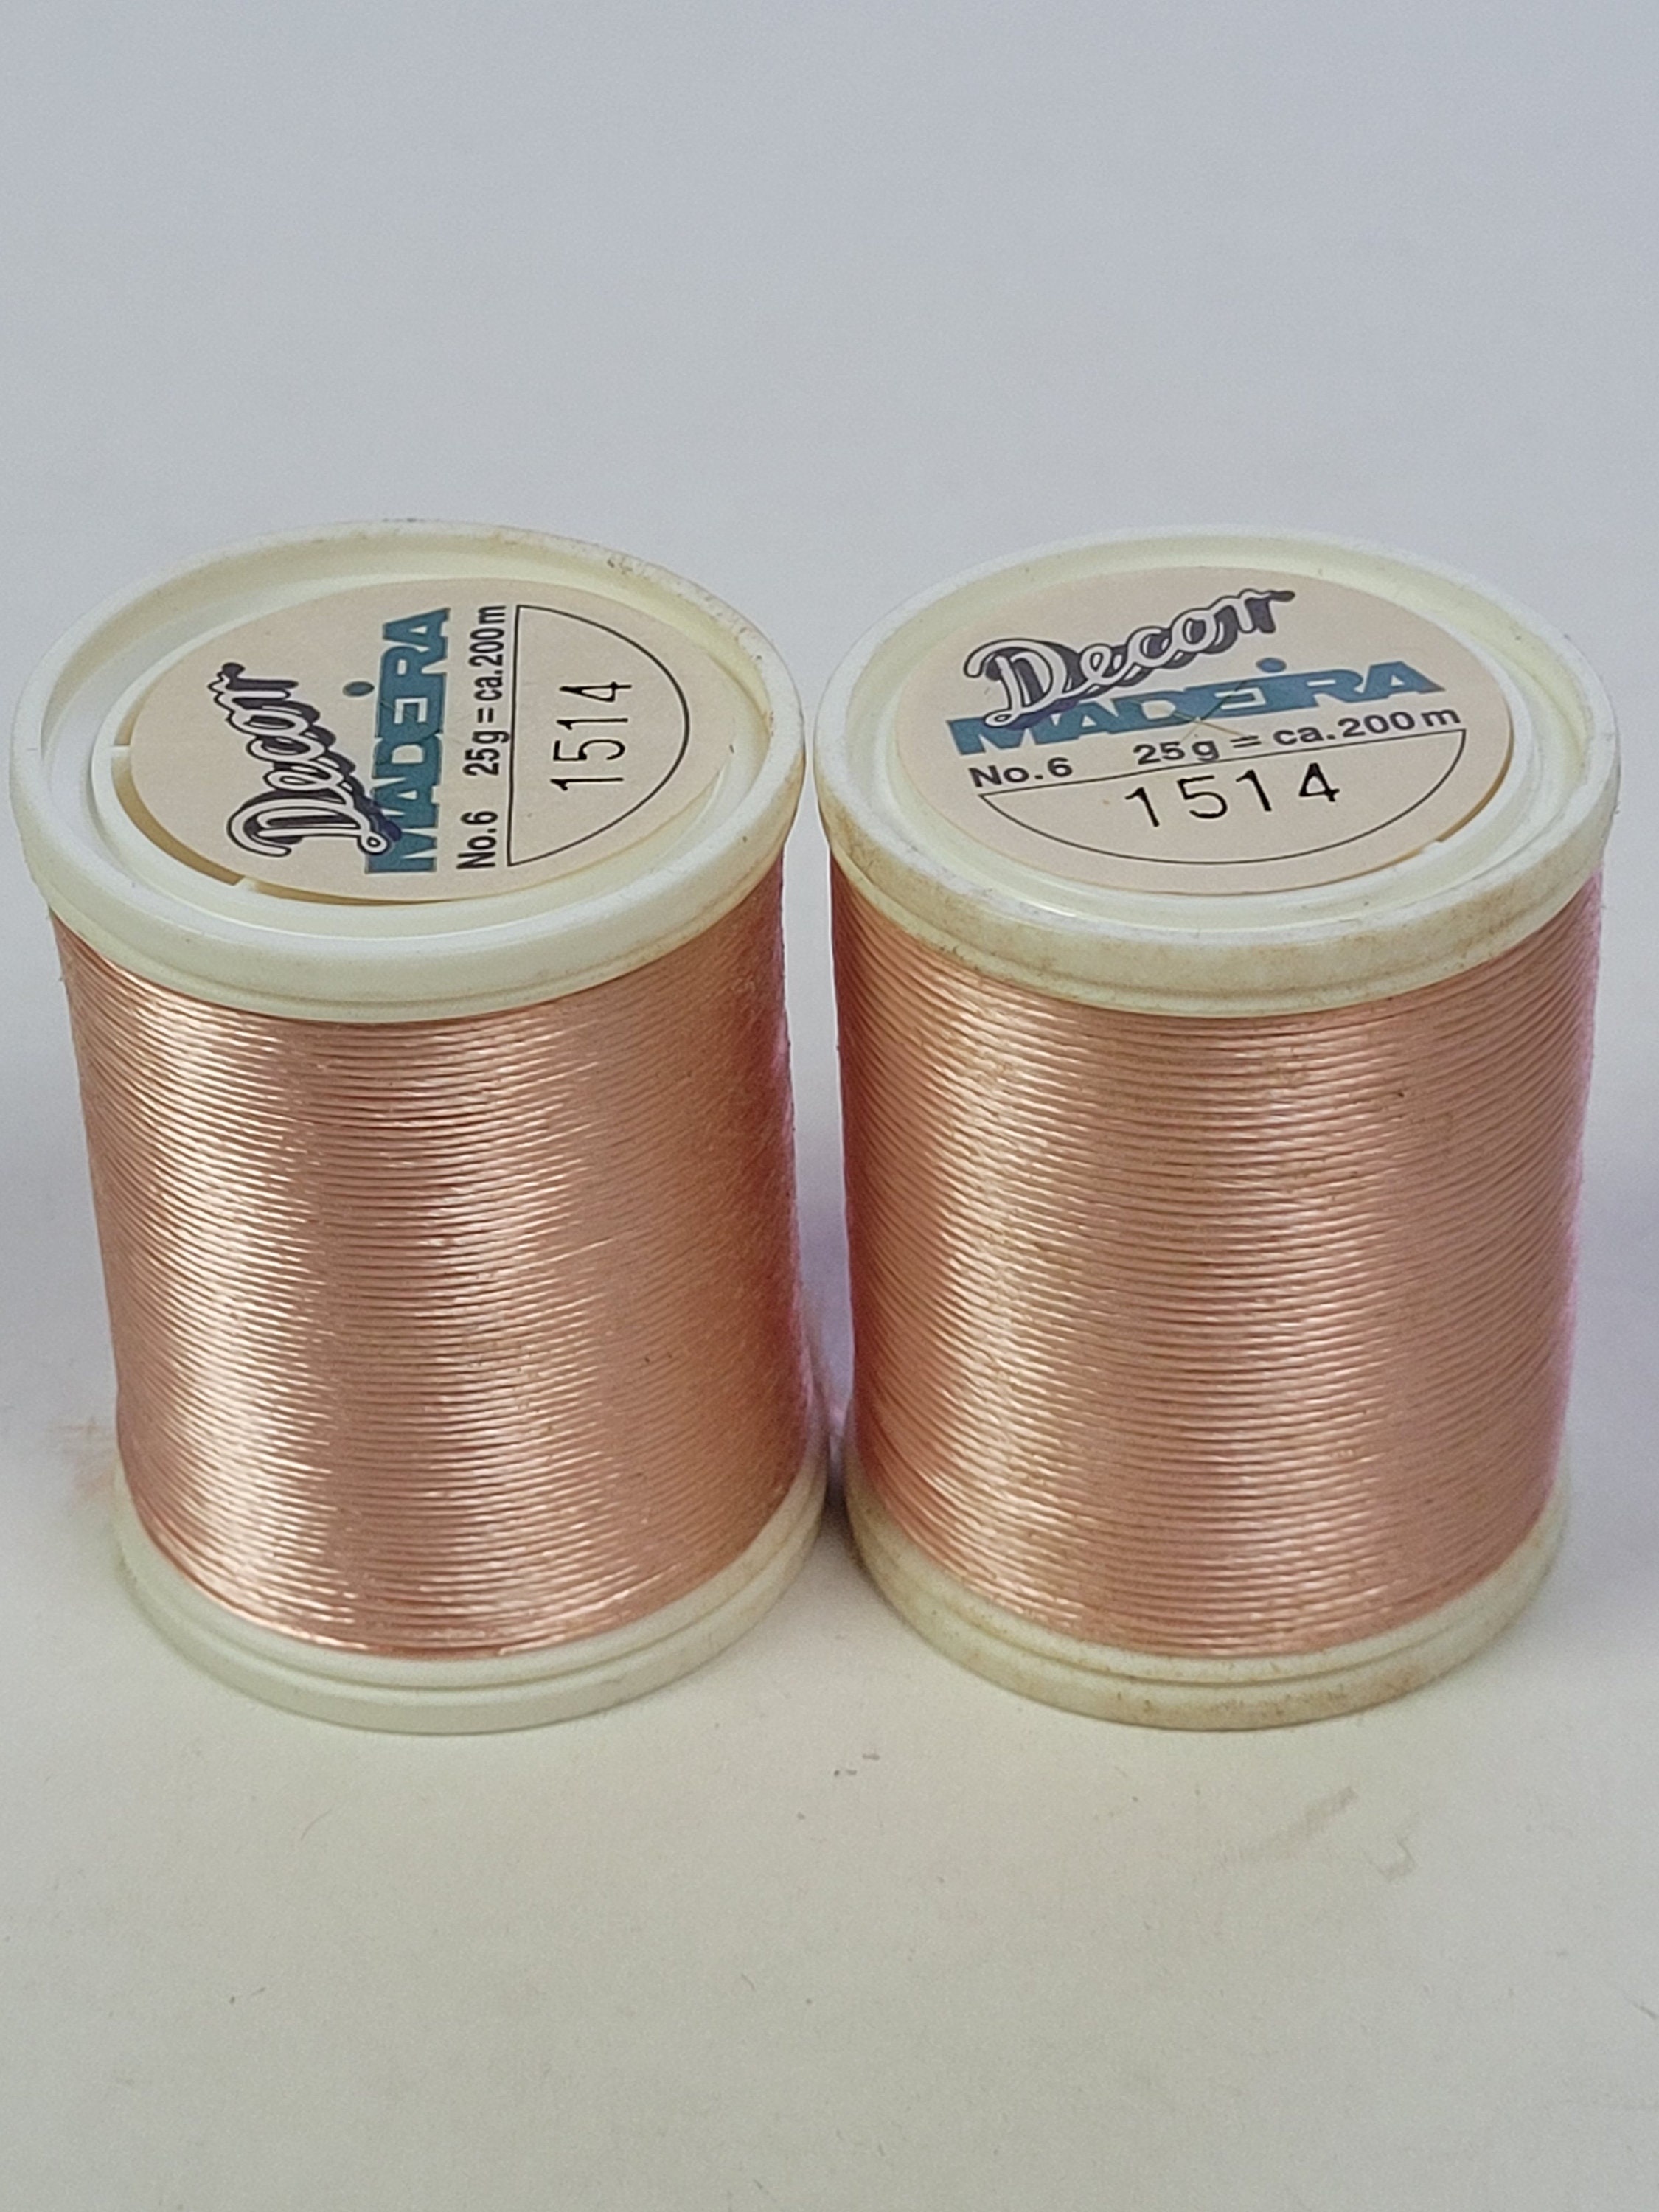 Embroidery Machine Thread - 20 Colors - 1100Yd Spools - Polyester Thread  Set - 40 Weight (120D/2) Premium Thread - Embroidery and Sewing